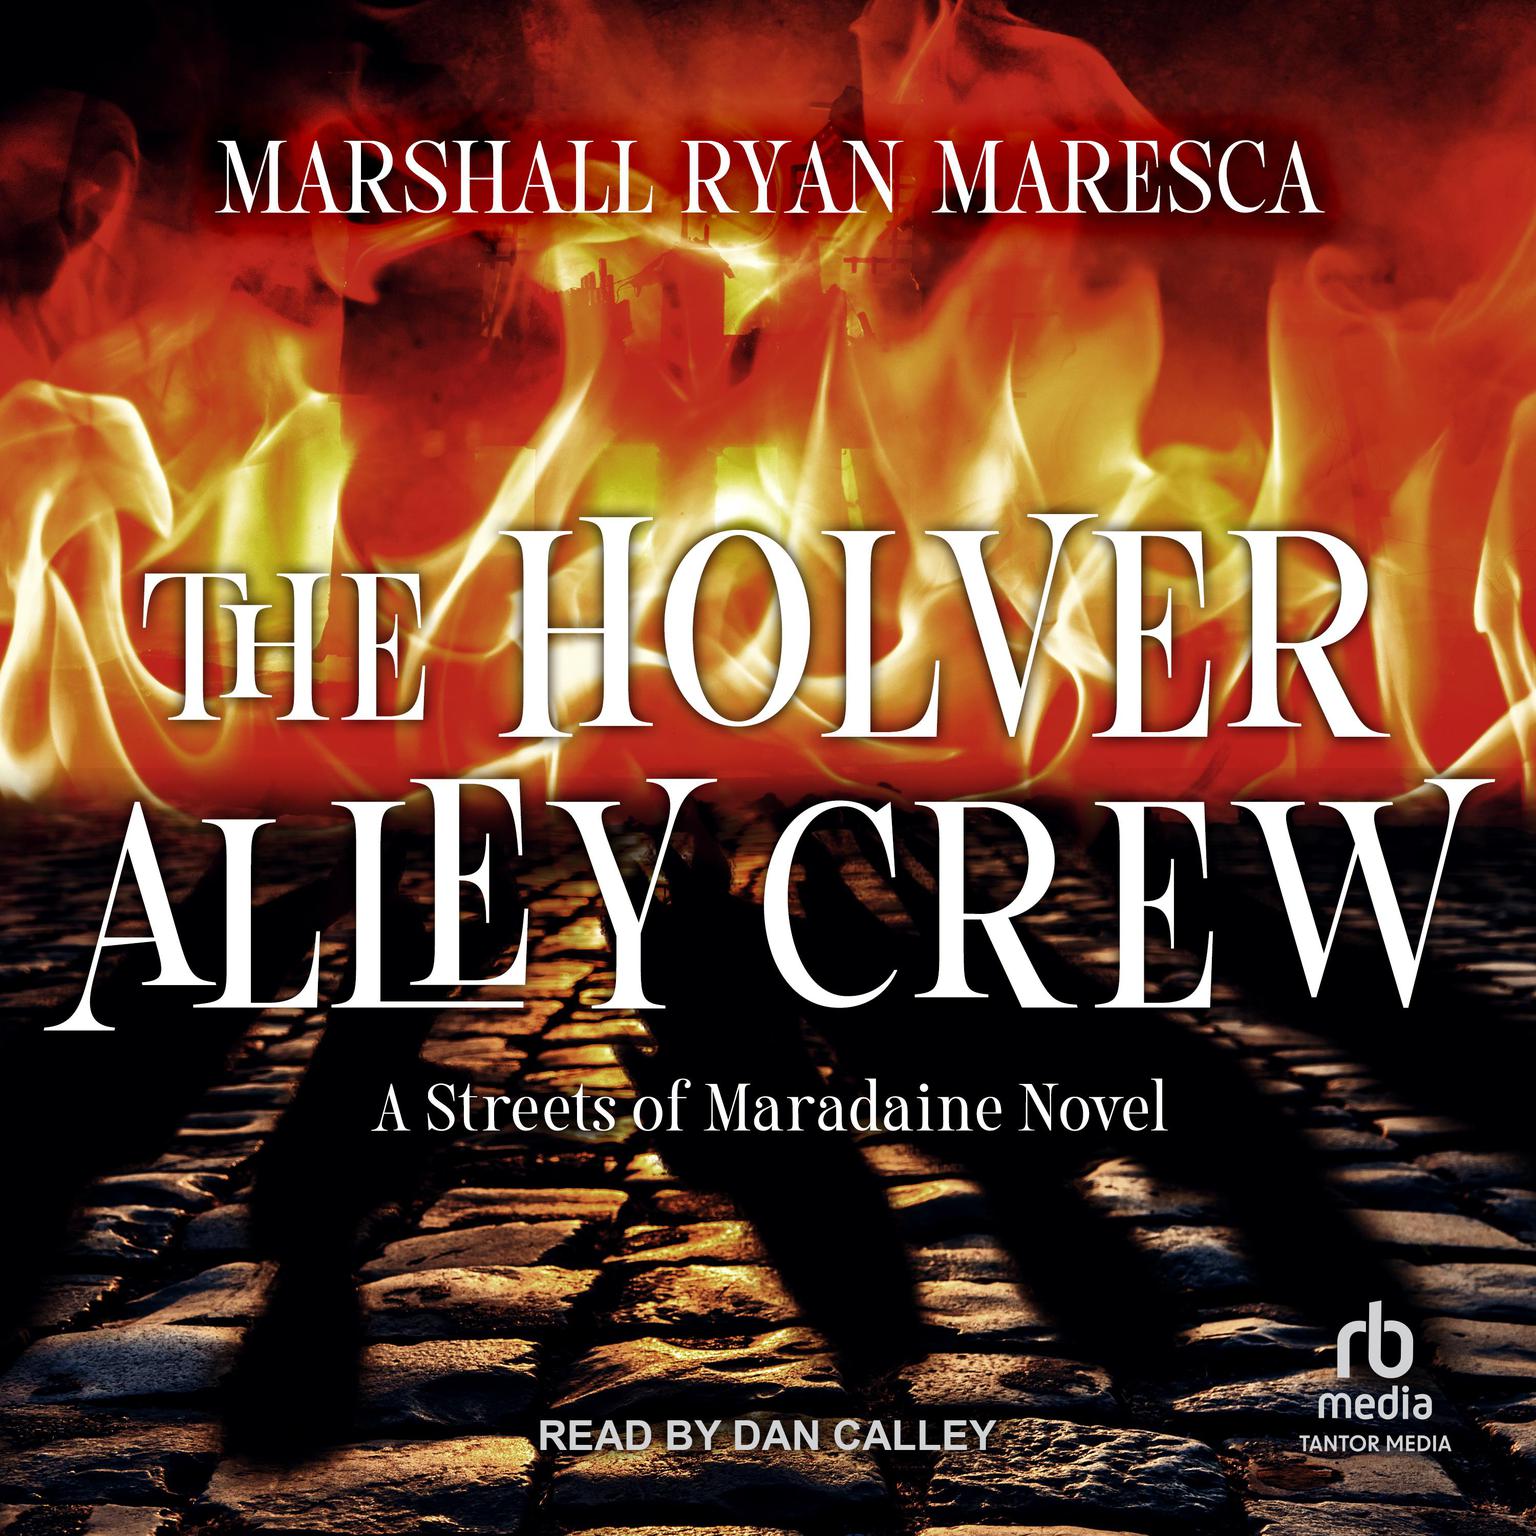 The Holver Alley Crew: A Streets of Maradaine Novel Audiobook, by Marshall Ryan Maresca